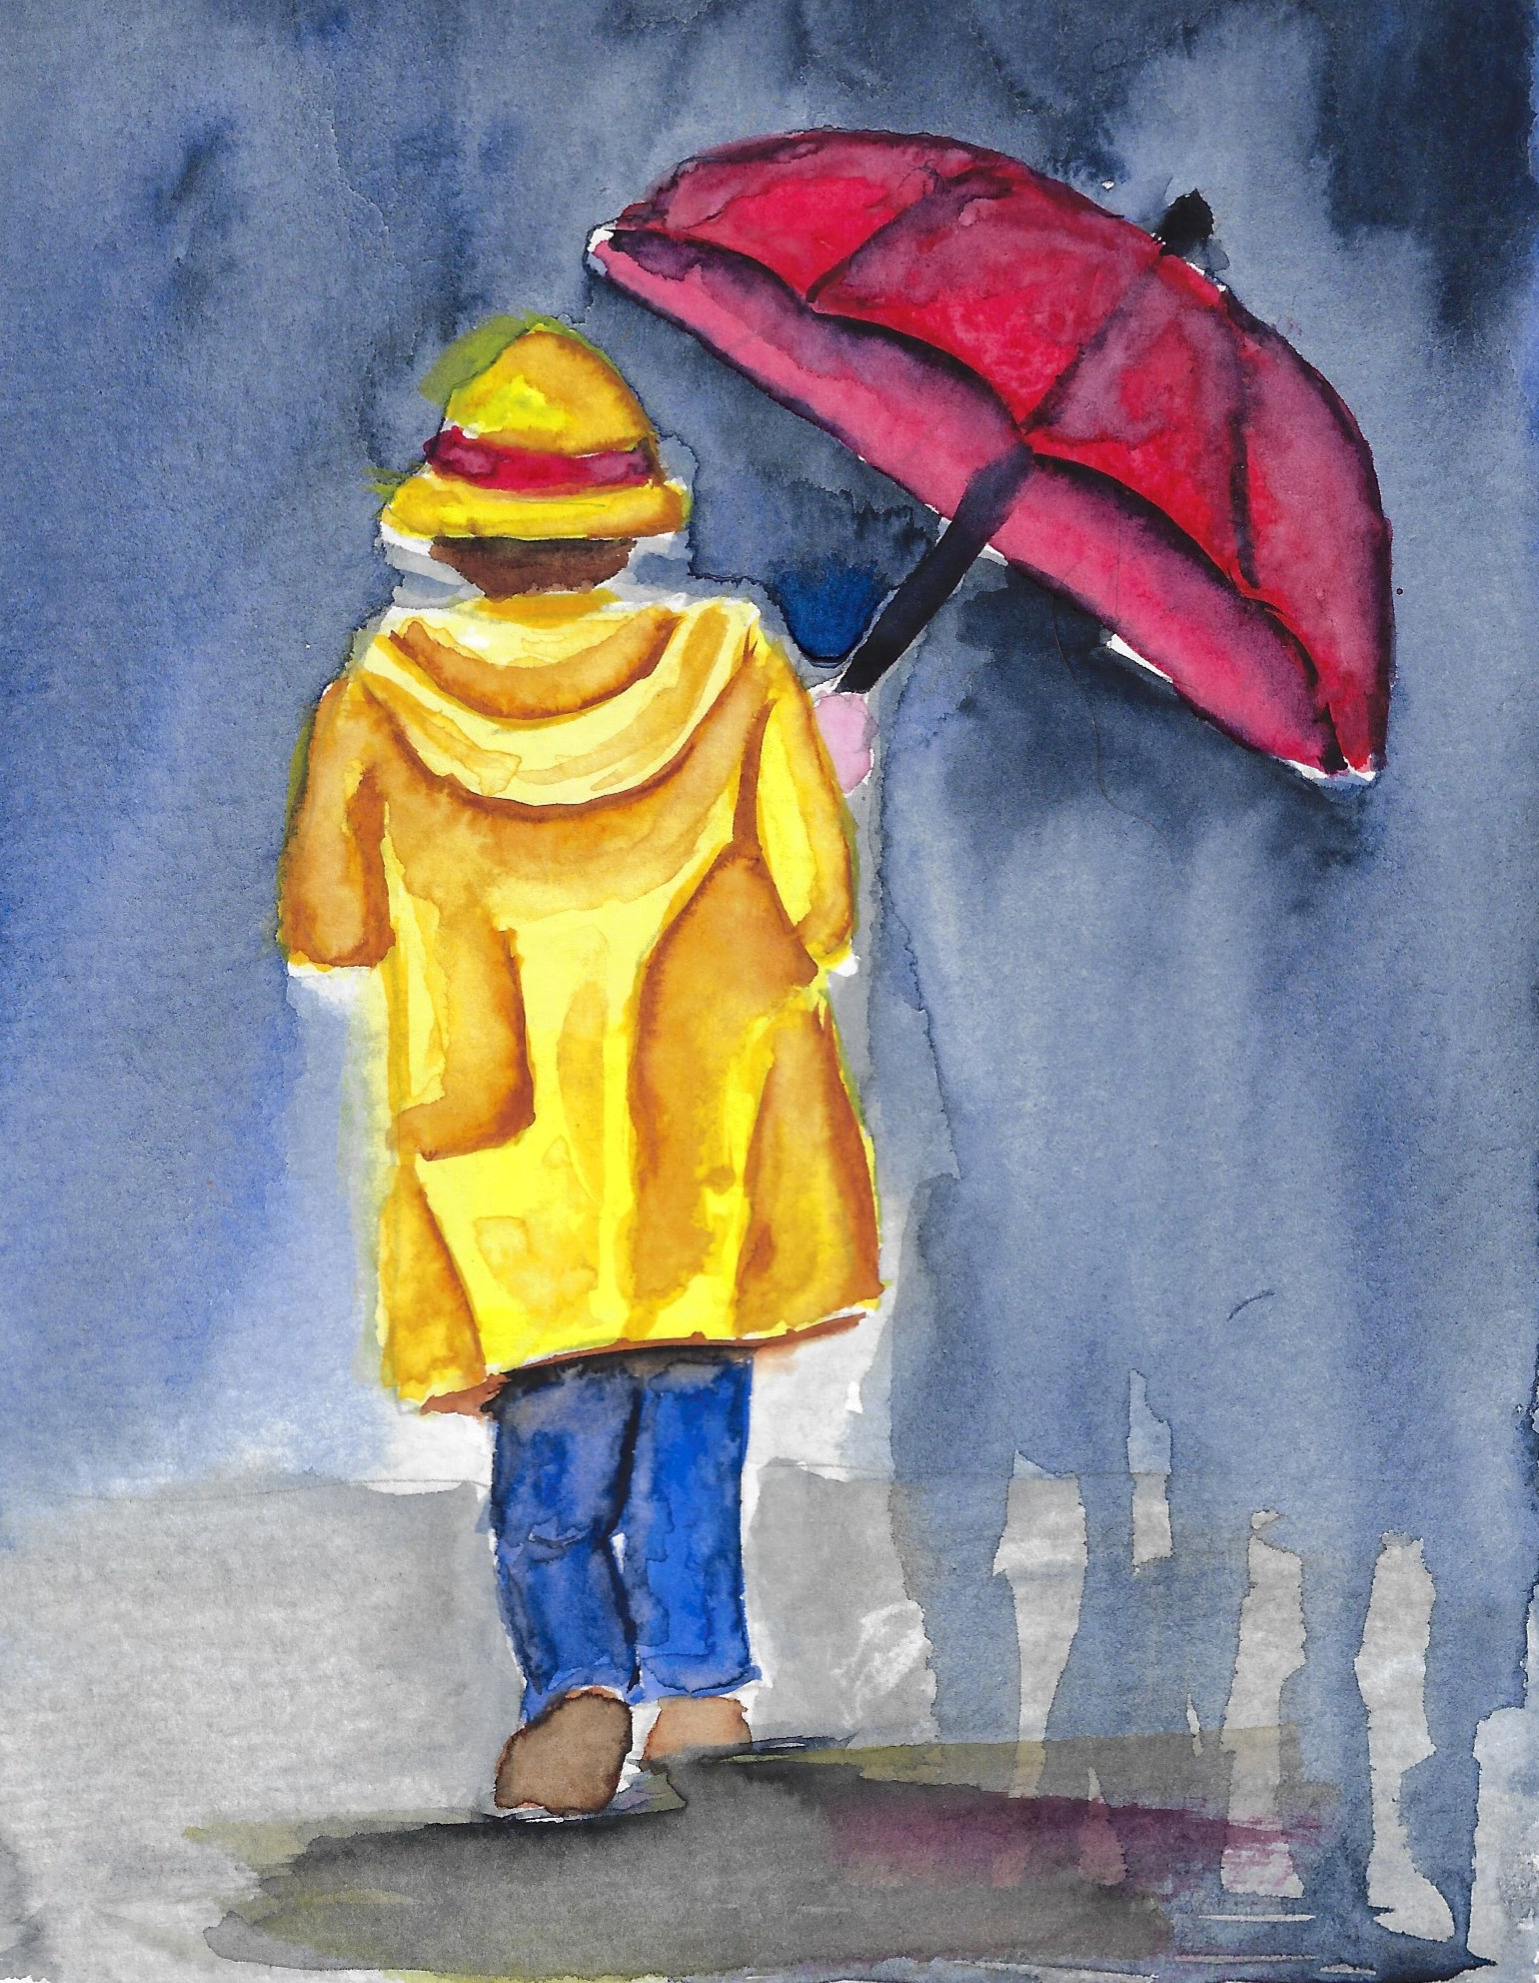 Person in a yellow raincoat with a red umbrella. Stormy background.